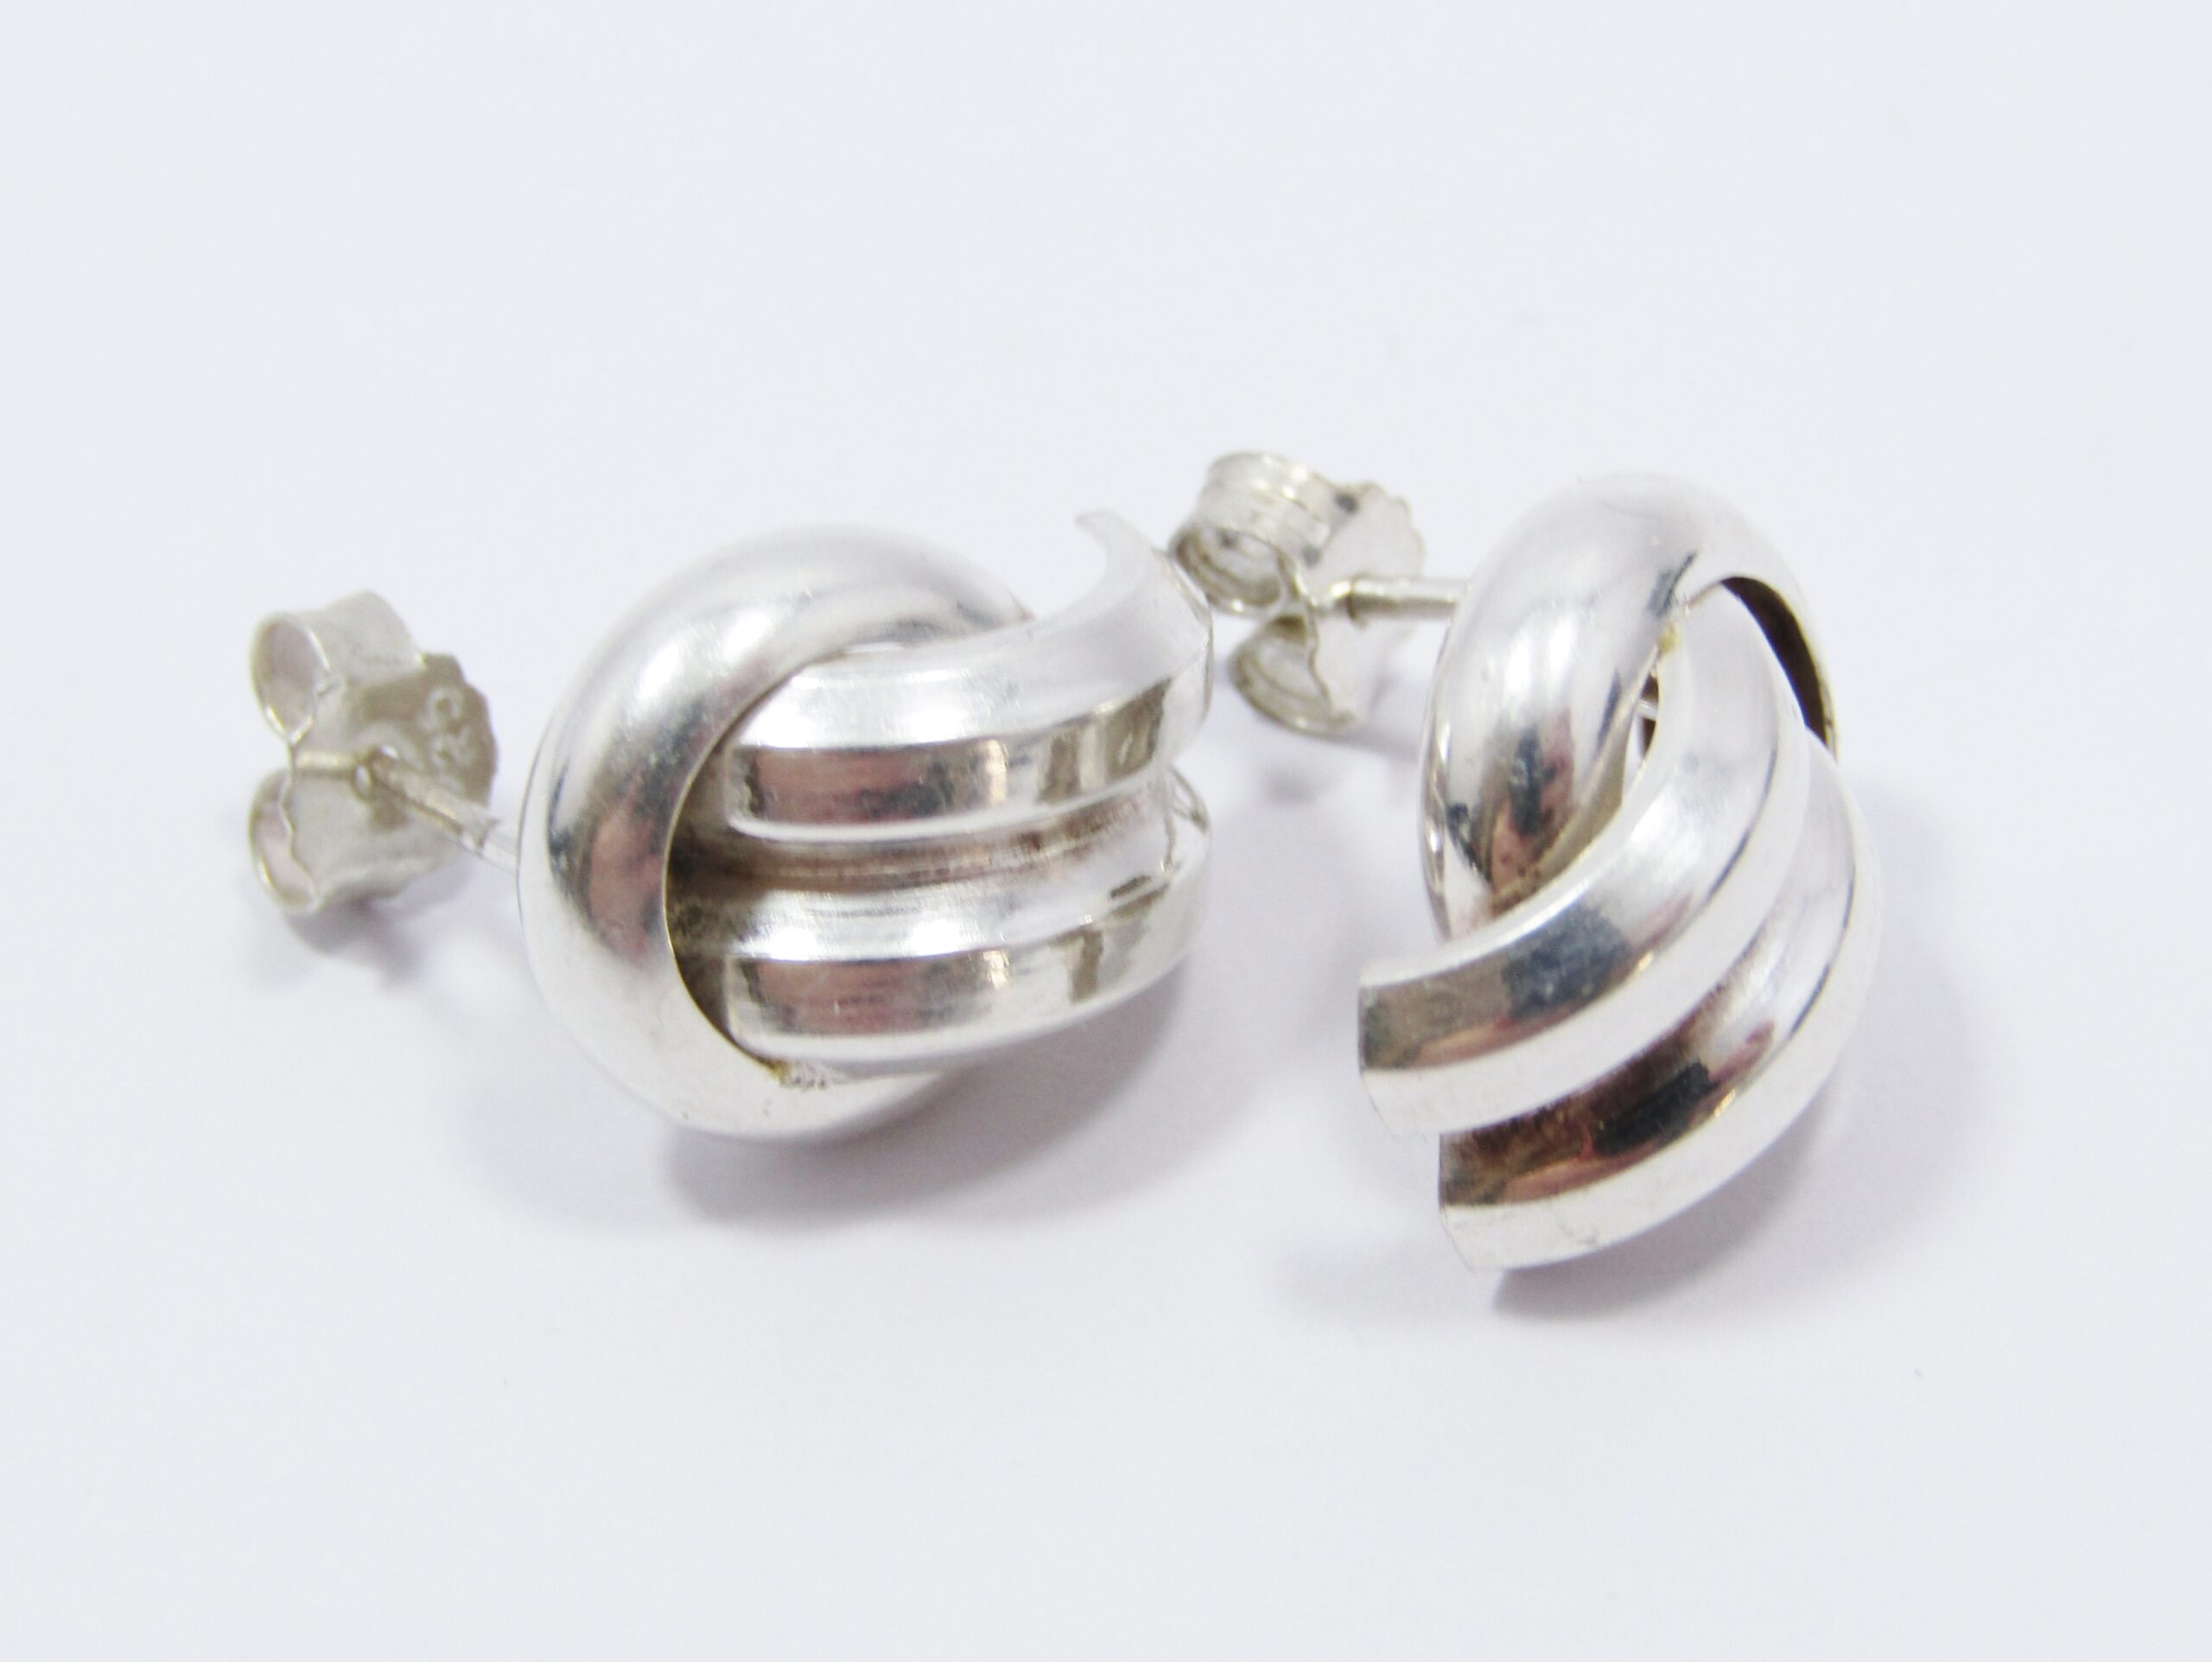 A Lovely Pair of Hollow Knotted Design Earrings in Sterling Silver.